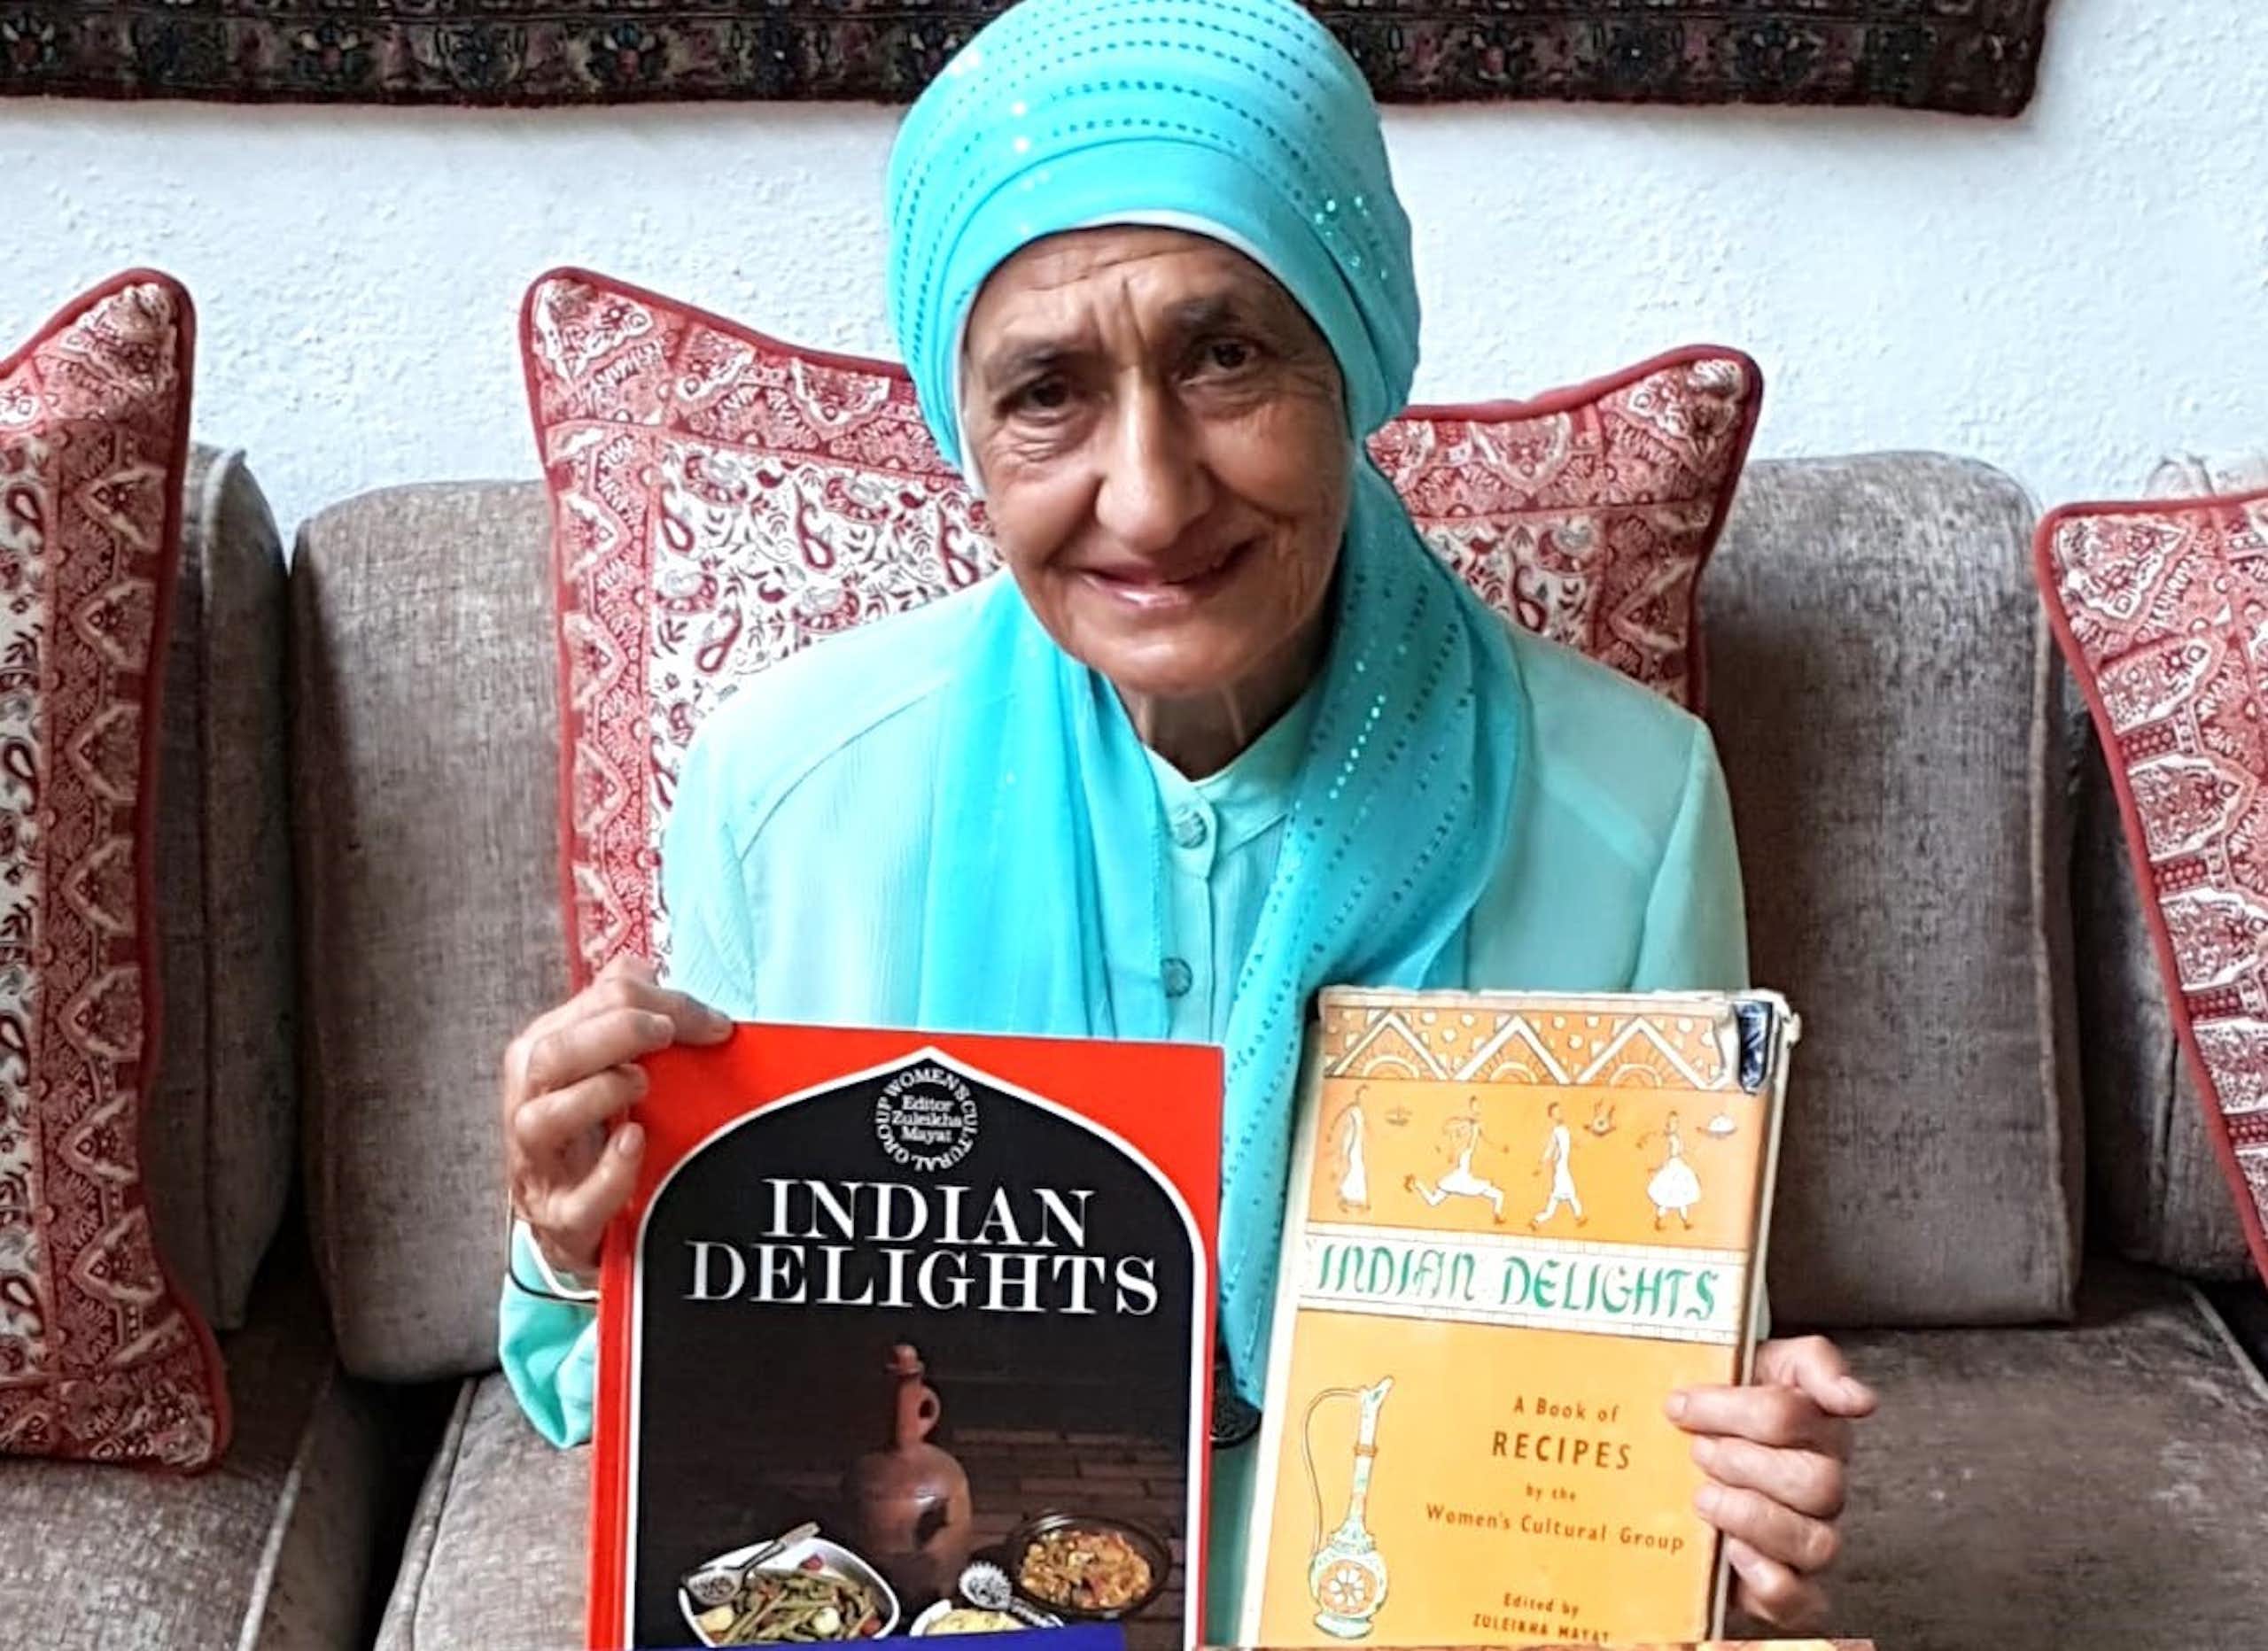 An elderly woman in a light blue headscarf and matching top proudly displays two books, different editions of Indian Delights